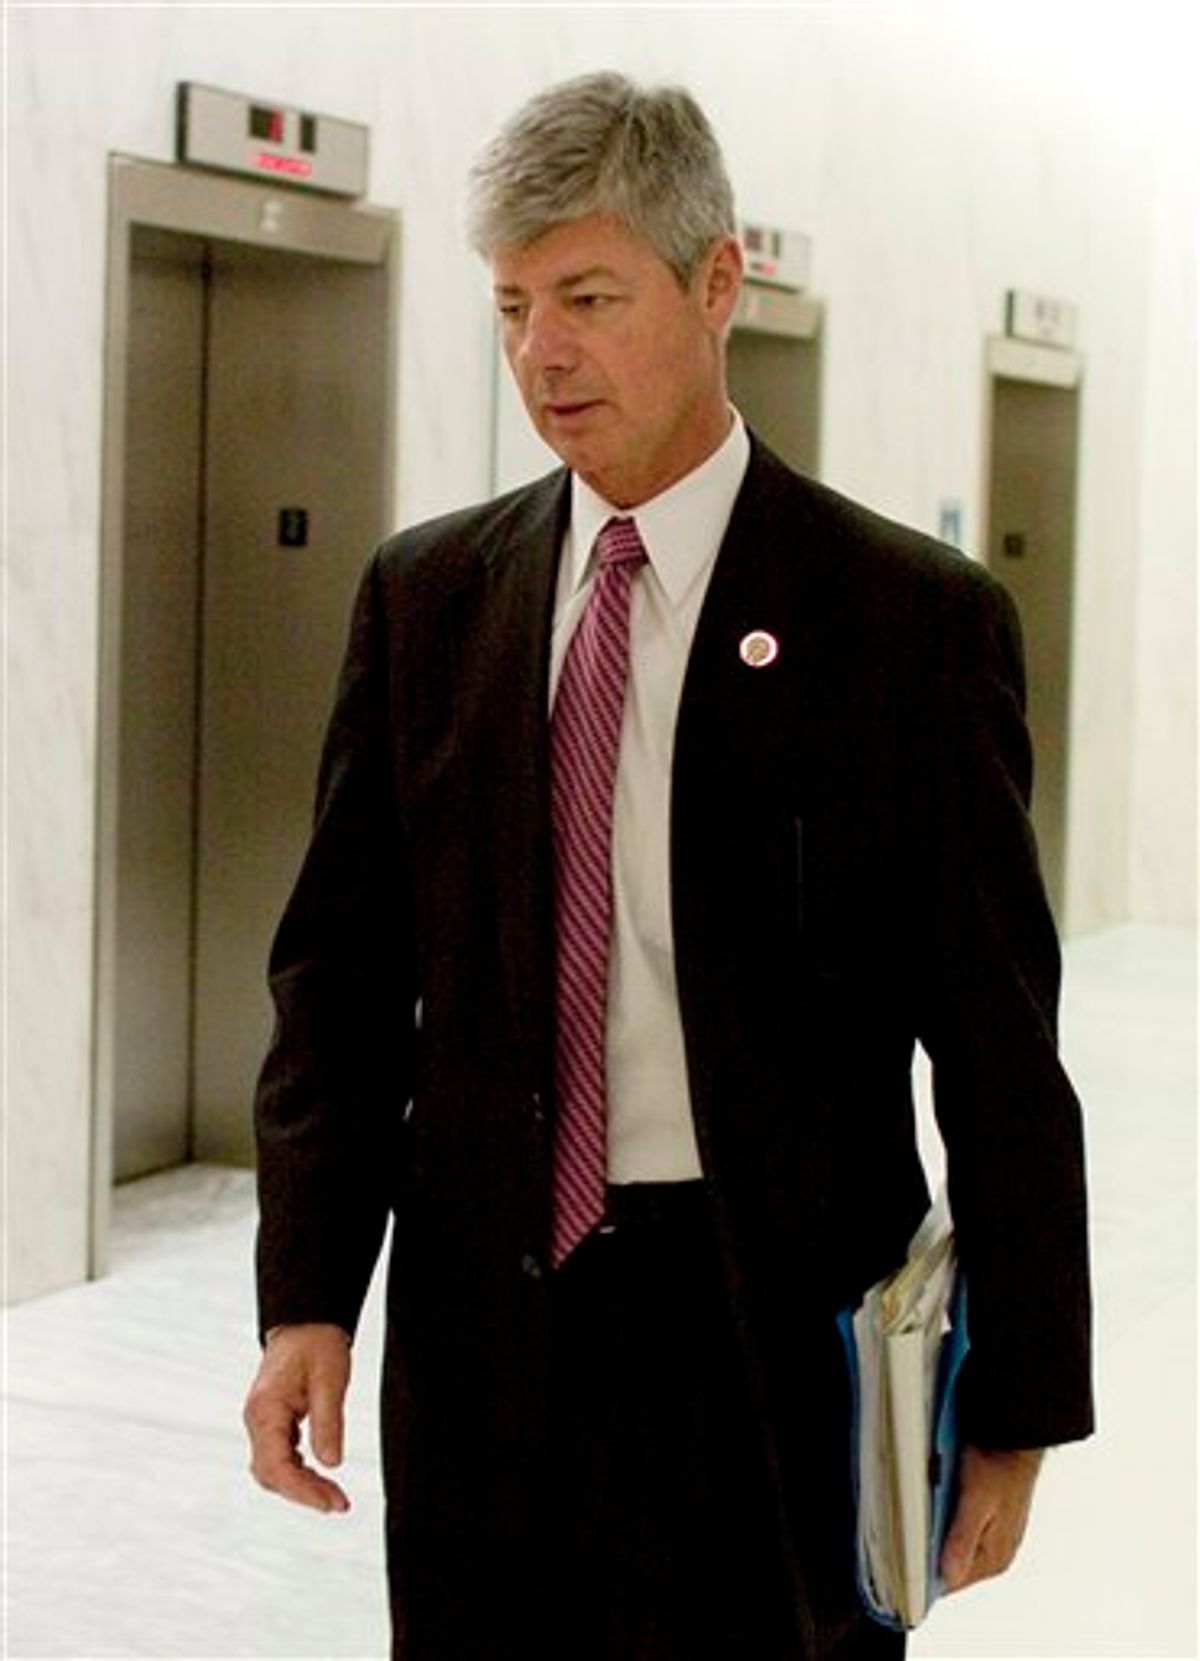 Rep. Bart Stupak, D-Mich., walks through the hallway of Cannon House Office building as the House prepares to vote on health care reform in the U.S. Capitol in Washington, Sunday, March 21, 2010. (AP Photo/Harry Hamburg) (AP)